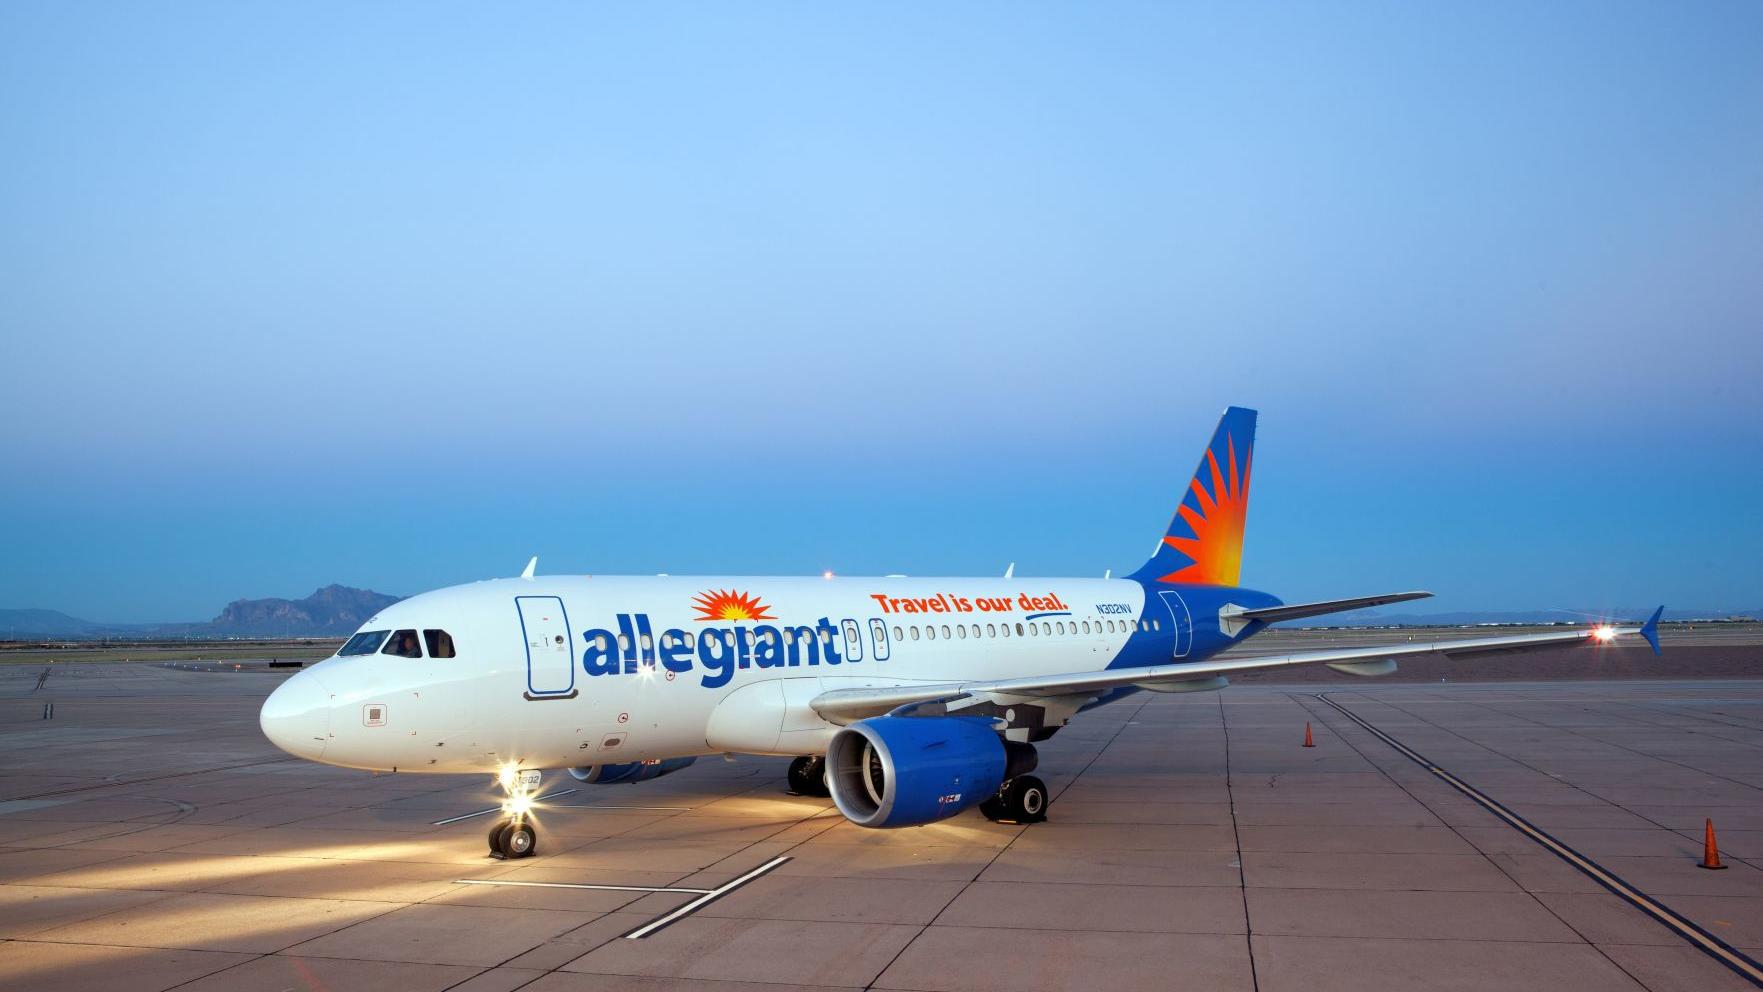 Allegiant Announces New Nonstop Flight From Omaha To Florida